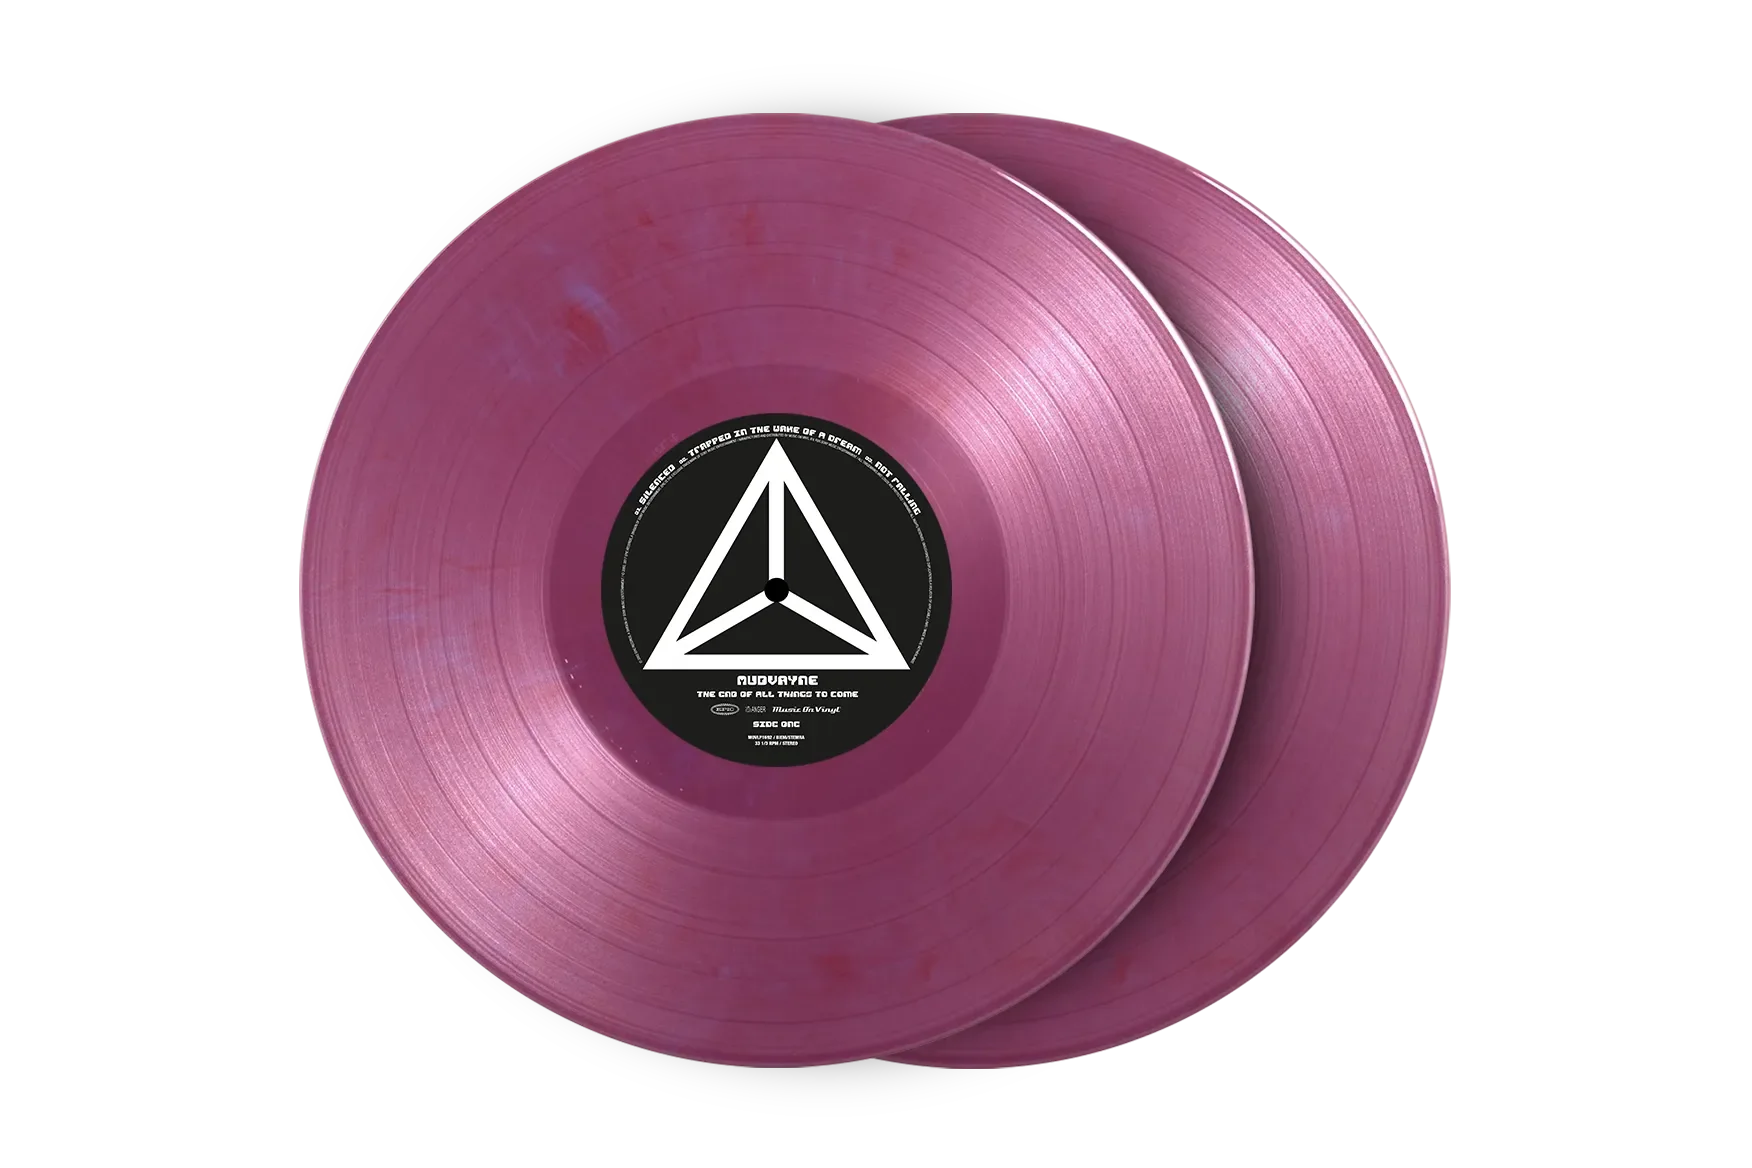 MUDVAYNE - The End Of All Things To Come (2024 Reissue) - 2LP - 180g Purple Marbled Vinyl [JUN 7]